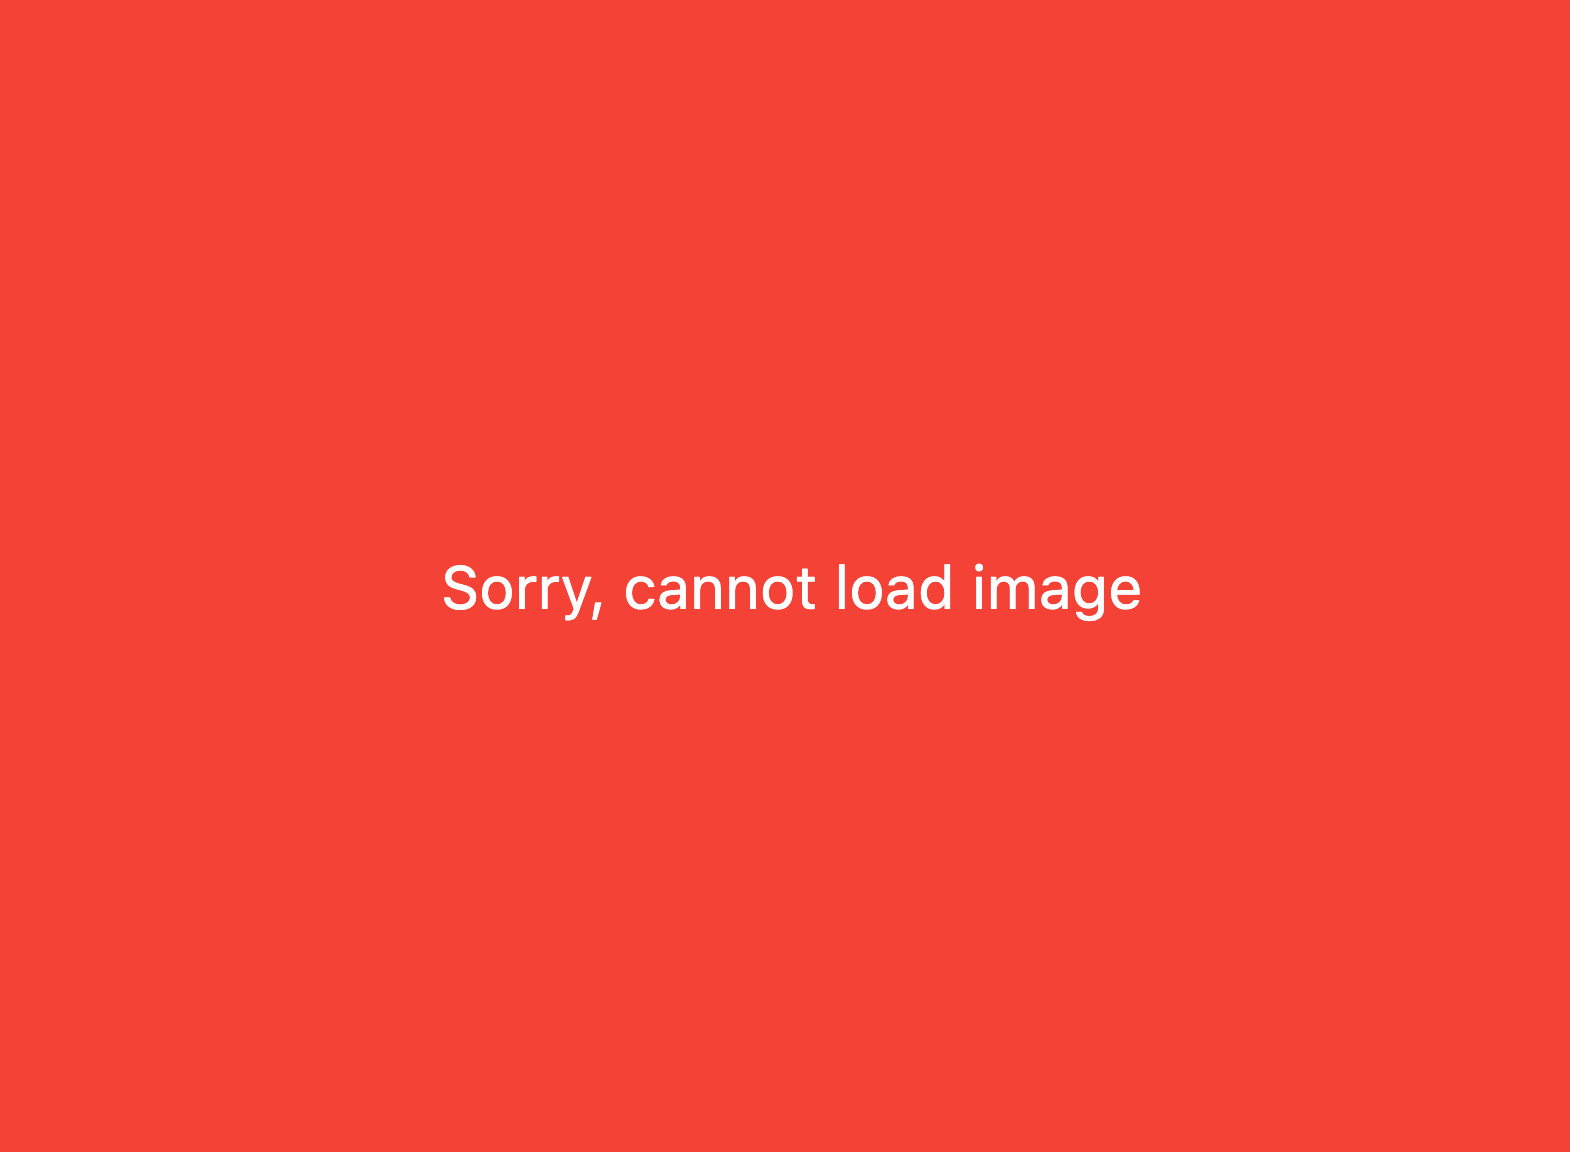 When our image fails to load, we show the second image rather than a blank screen.